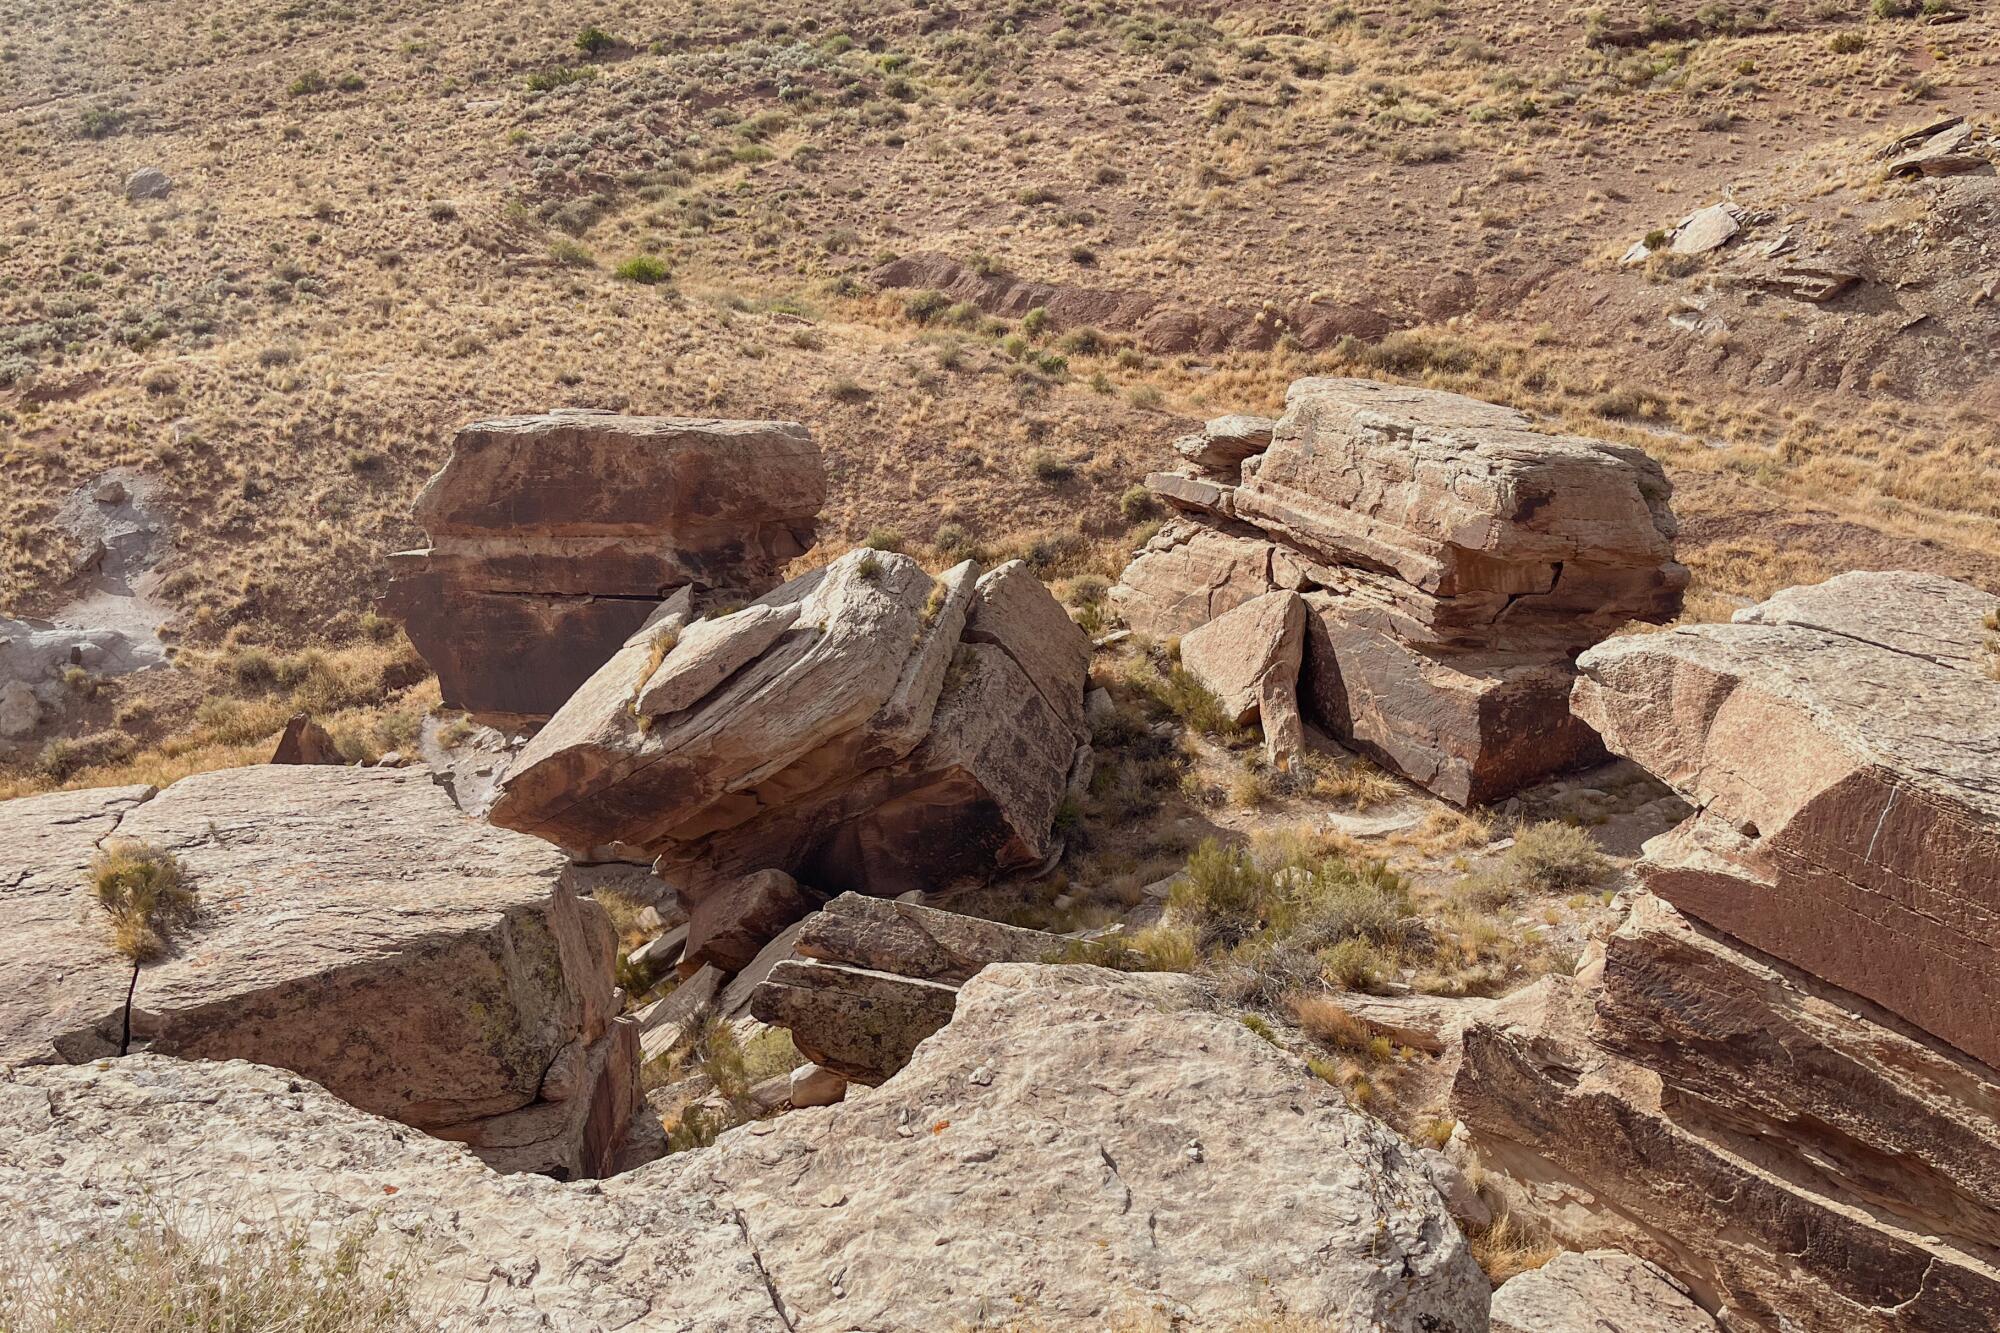 Rocks with petroglyphs on them at Newspaper Rock inside of Petrified Forest National Park.